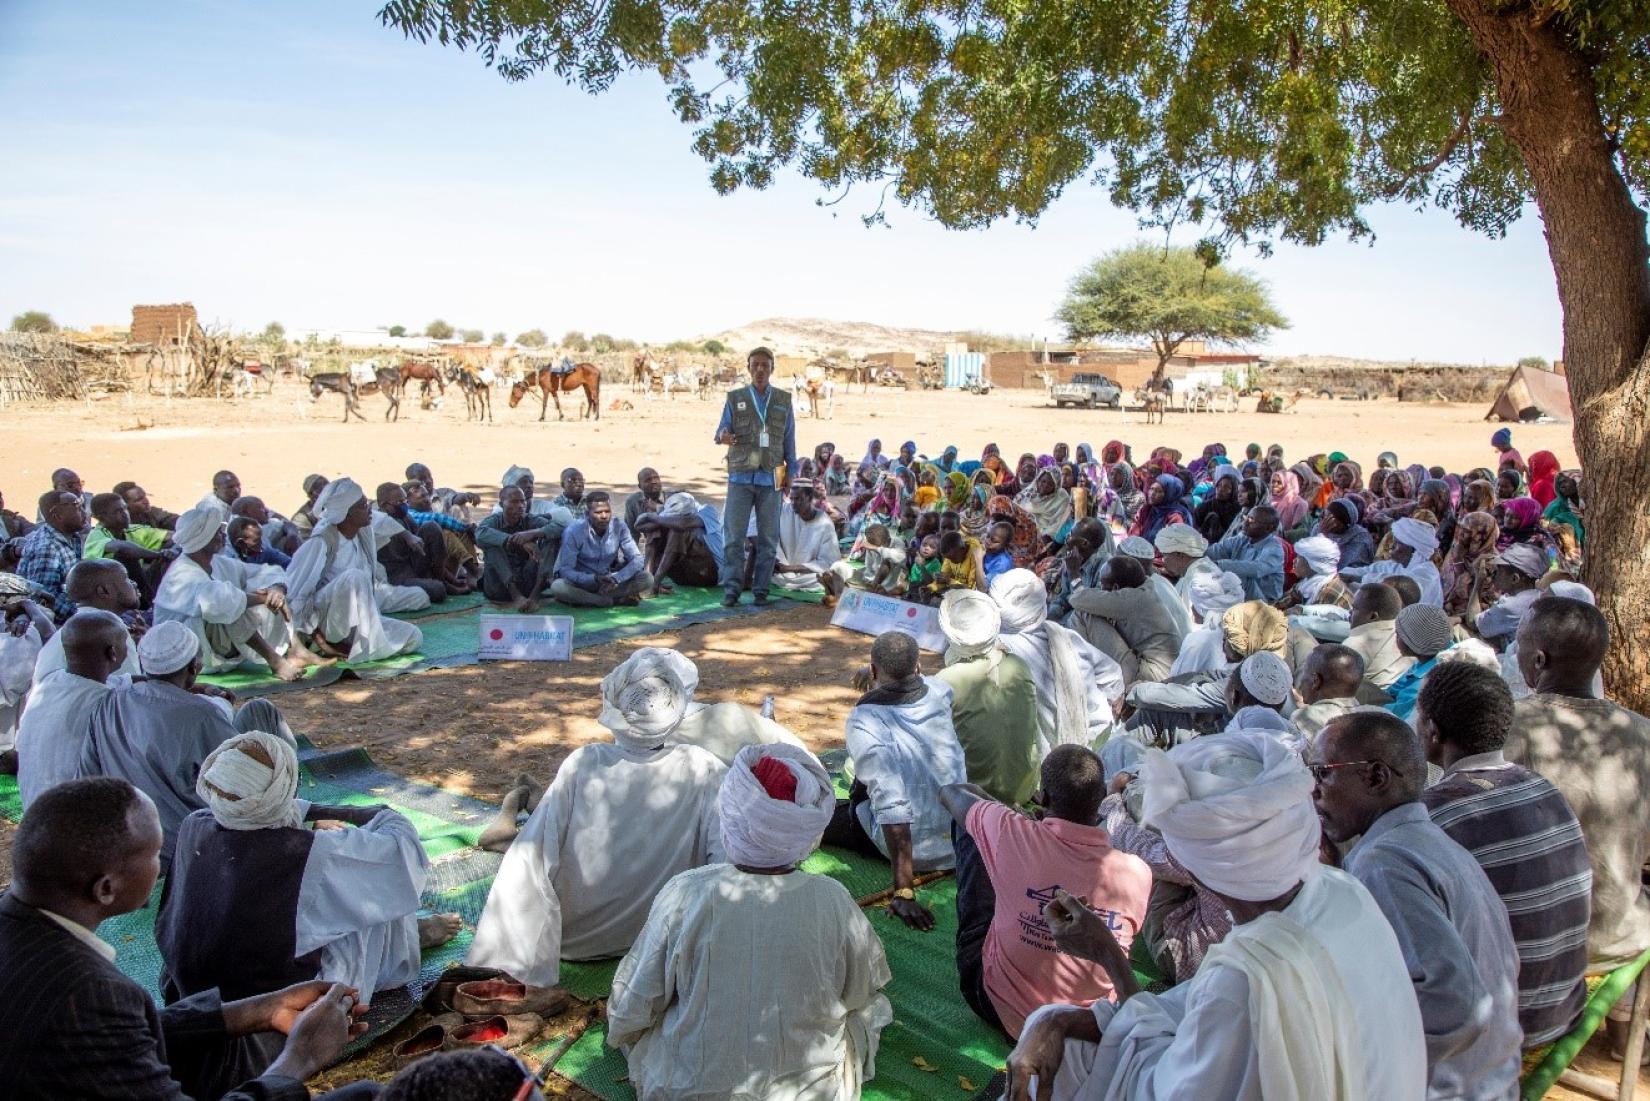 Community information meeting on the project in Korma village, El Fasher Locality, North Darfur